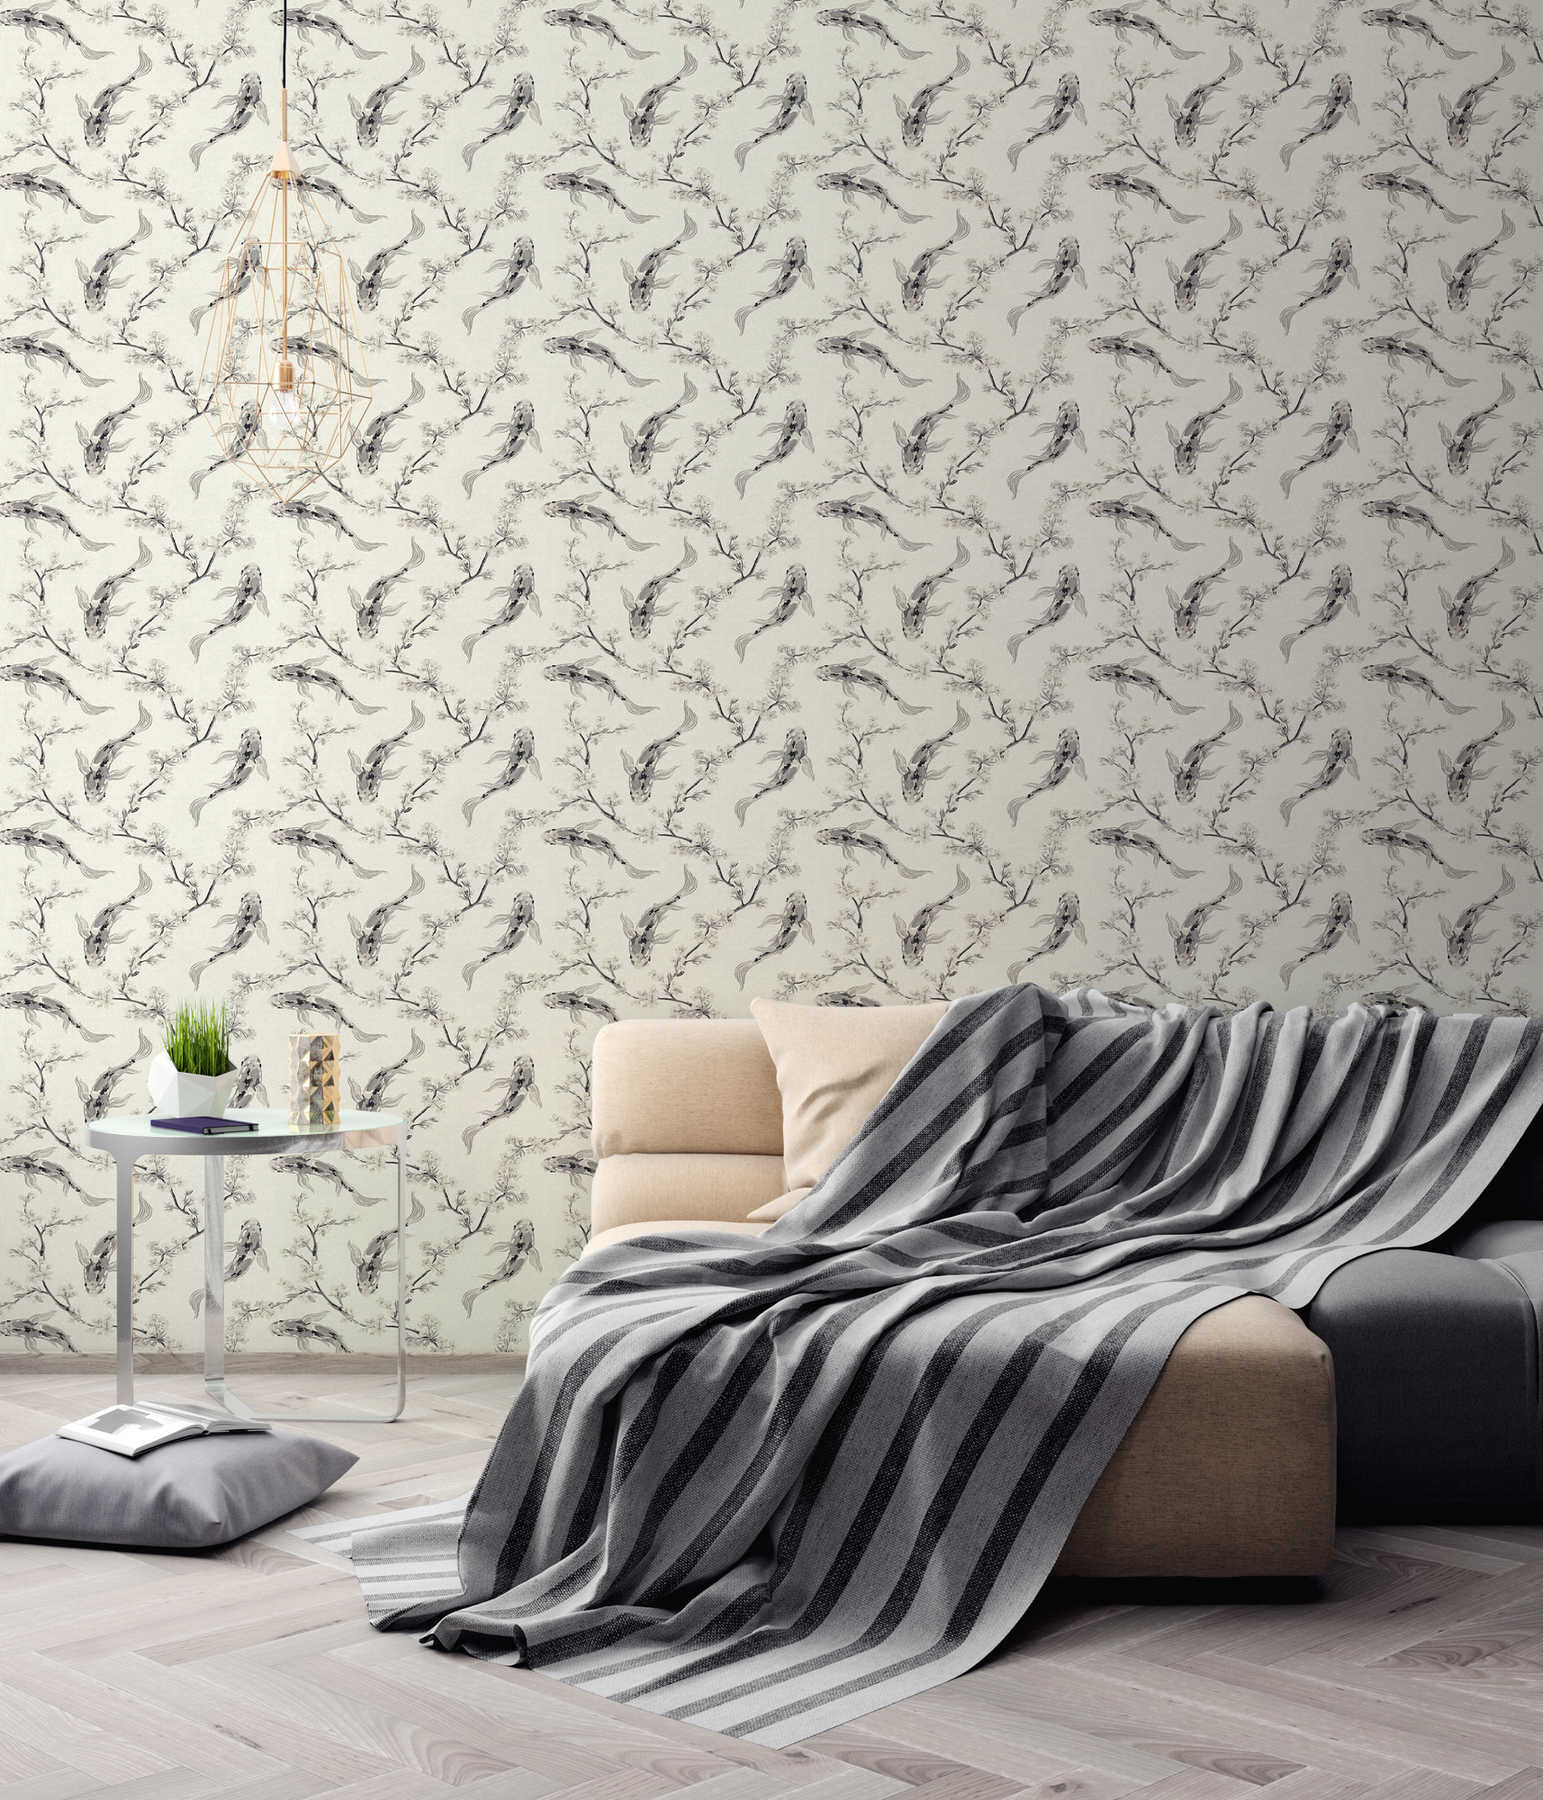             Non-woven wallpaper with koi pattern in Asian style - grey, beige, cream
        